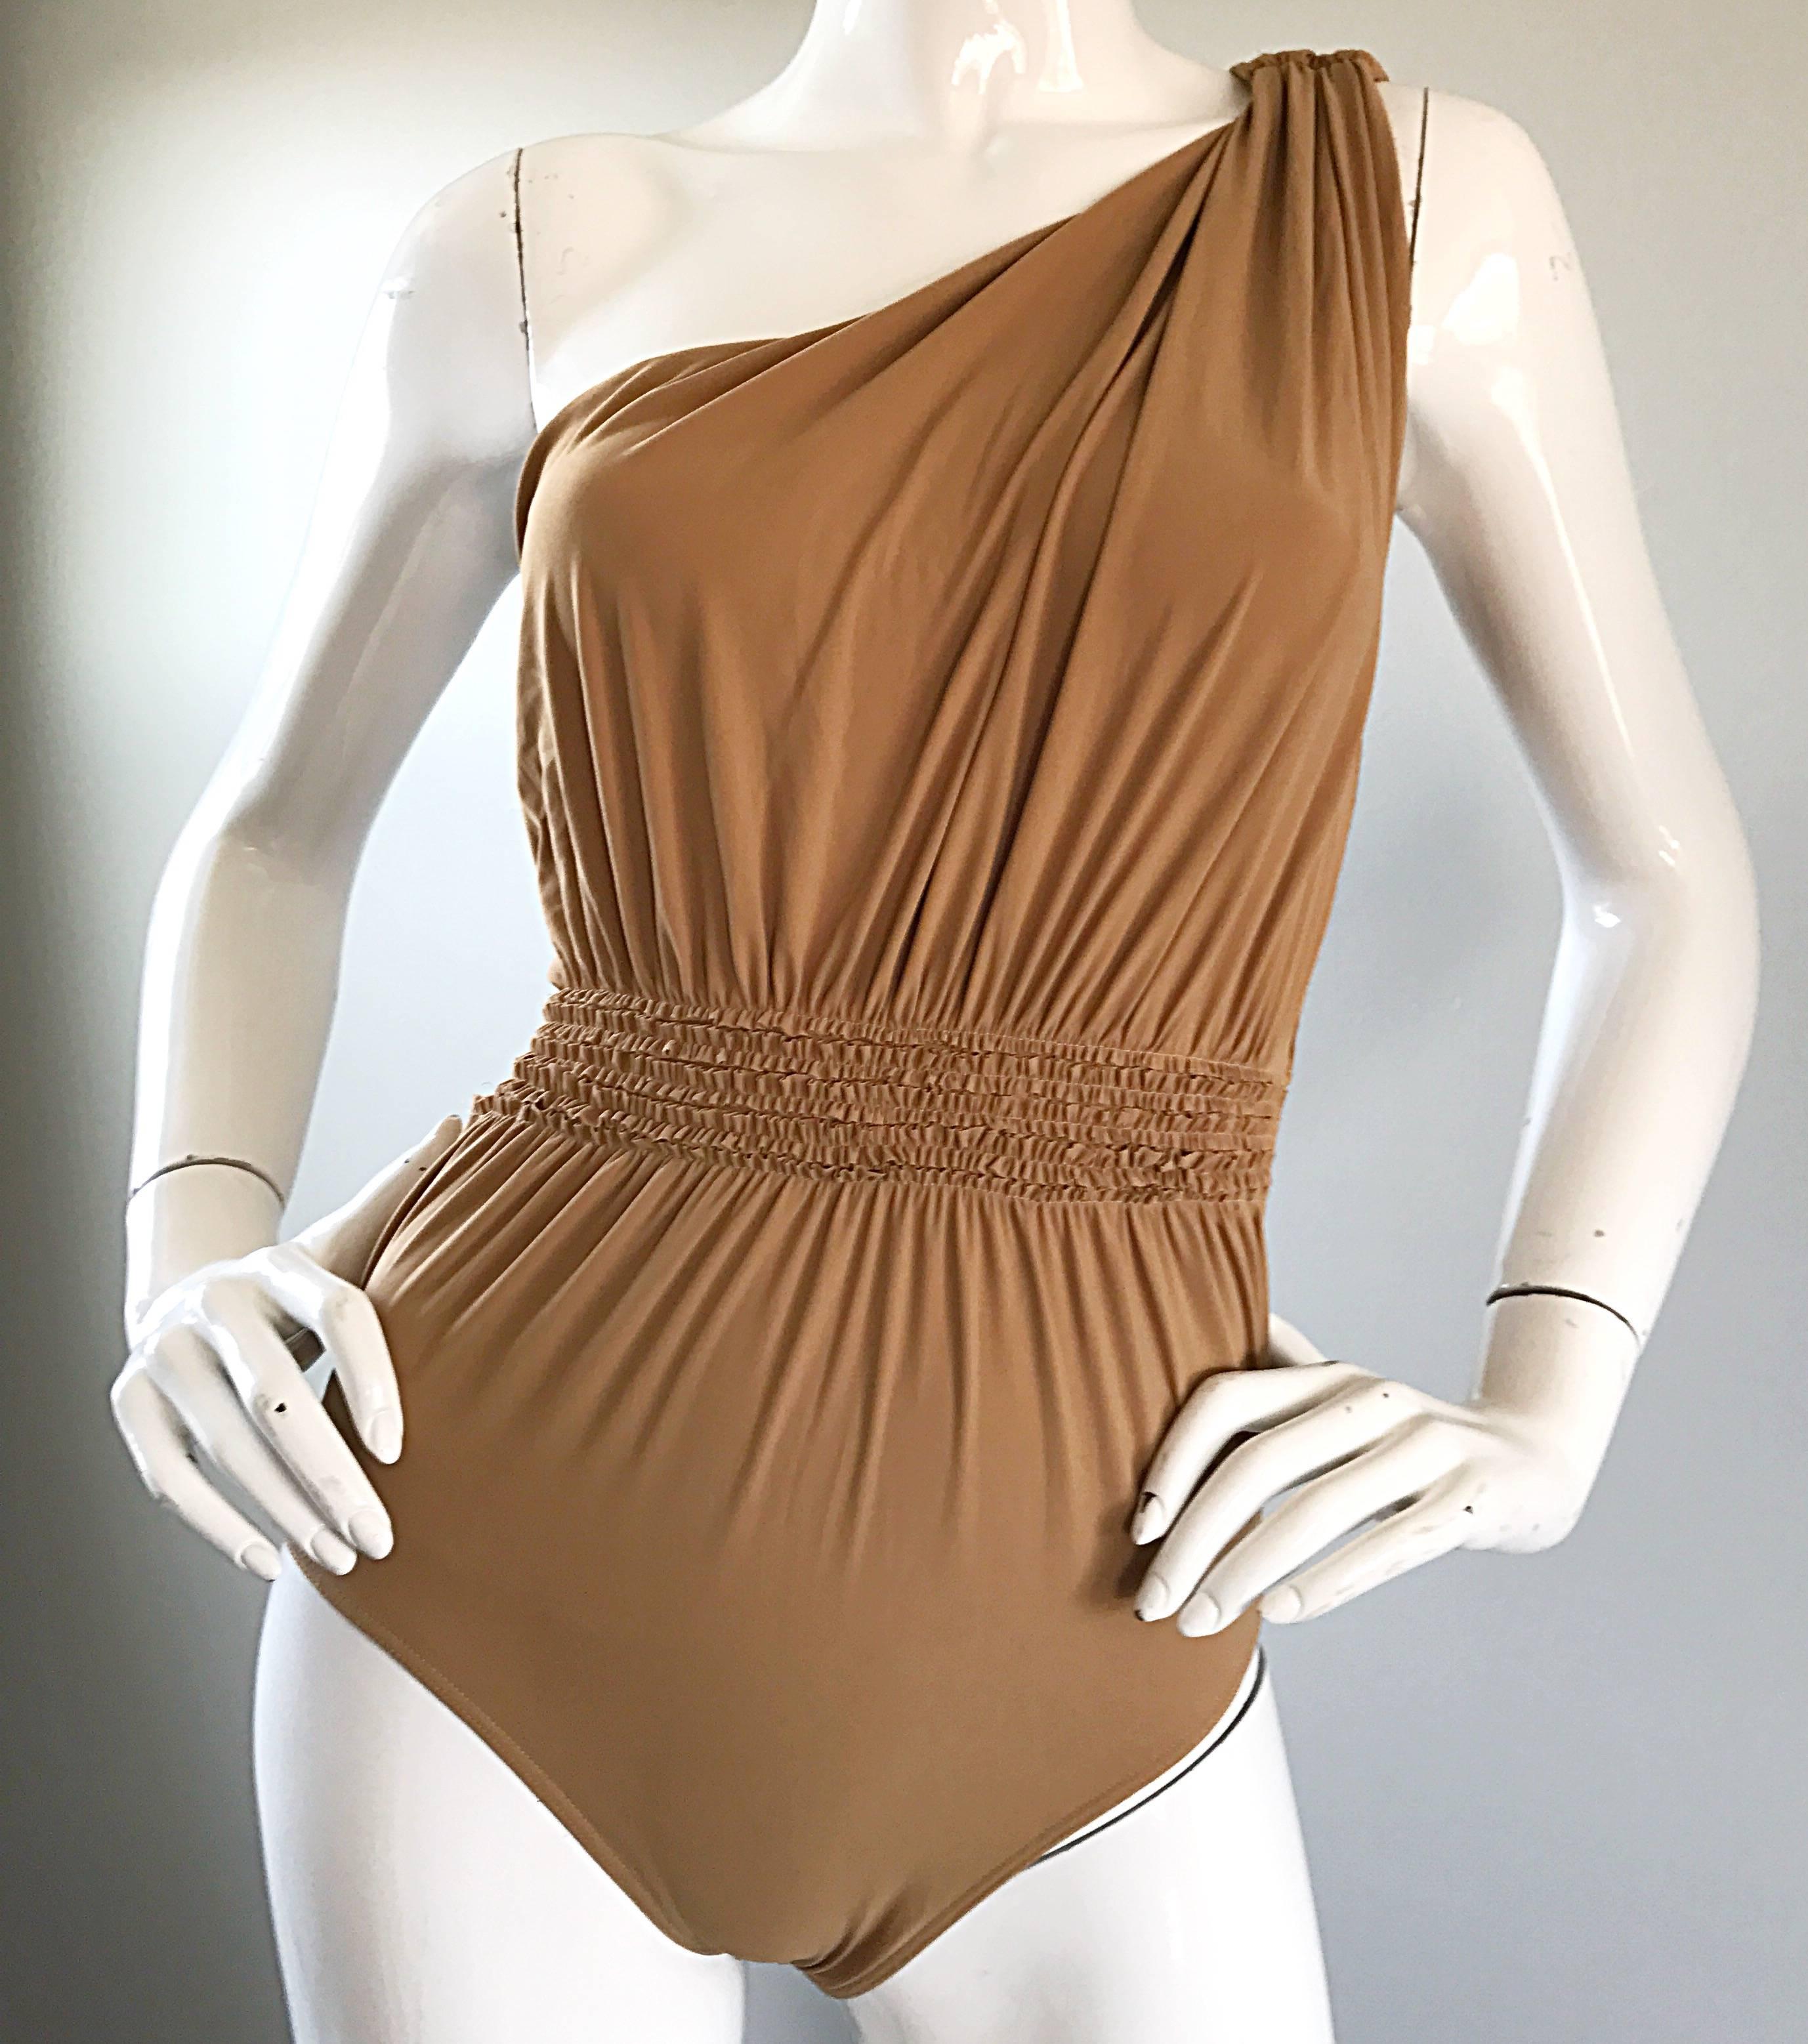 Lanvin 2011 Alber Elbaz Tan Caramel One Shoulder Grecian Bodysuit or Swimsuit In Excellent Condition For Sale In San Diego, CA